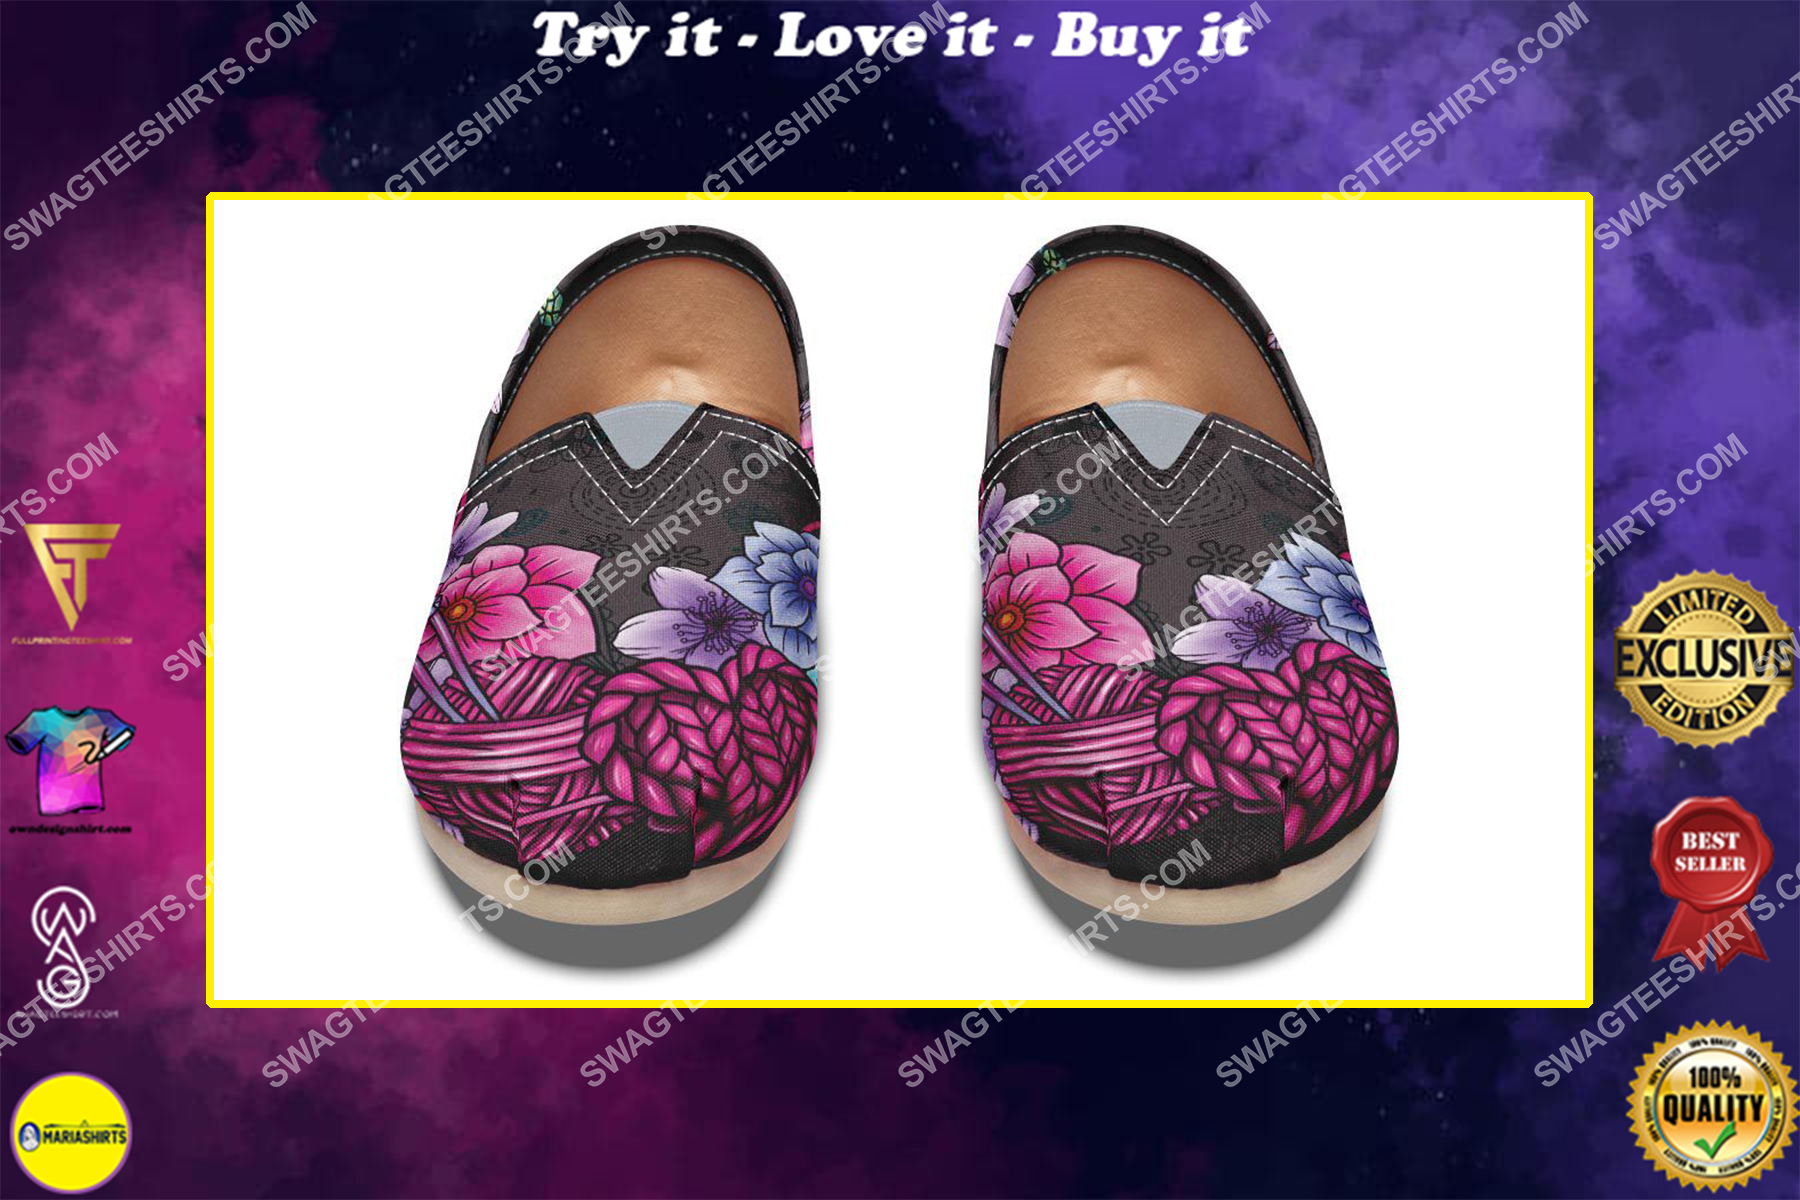 floral knitting vintage all over printed toms shoes